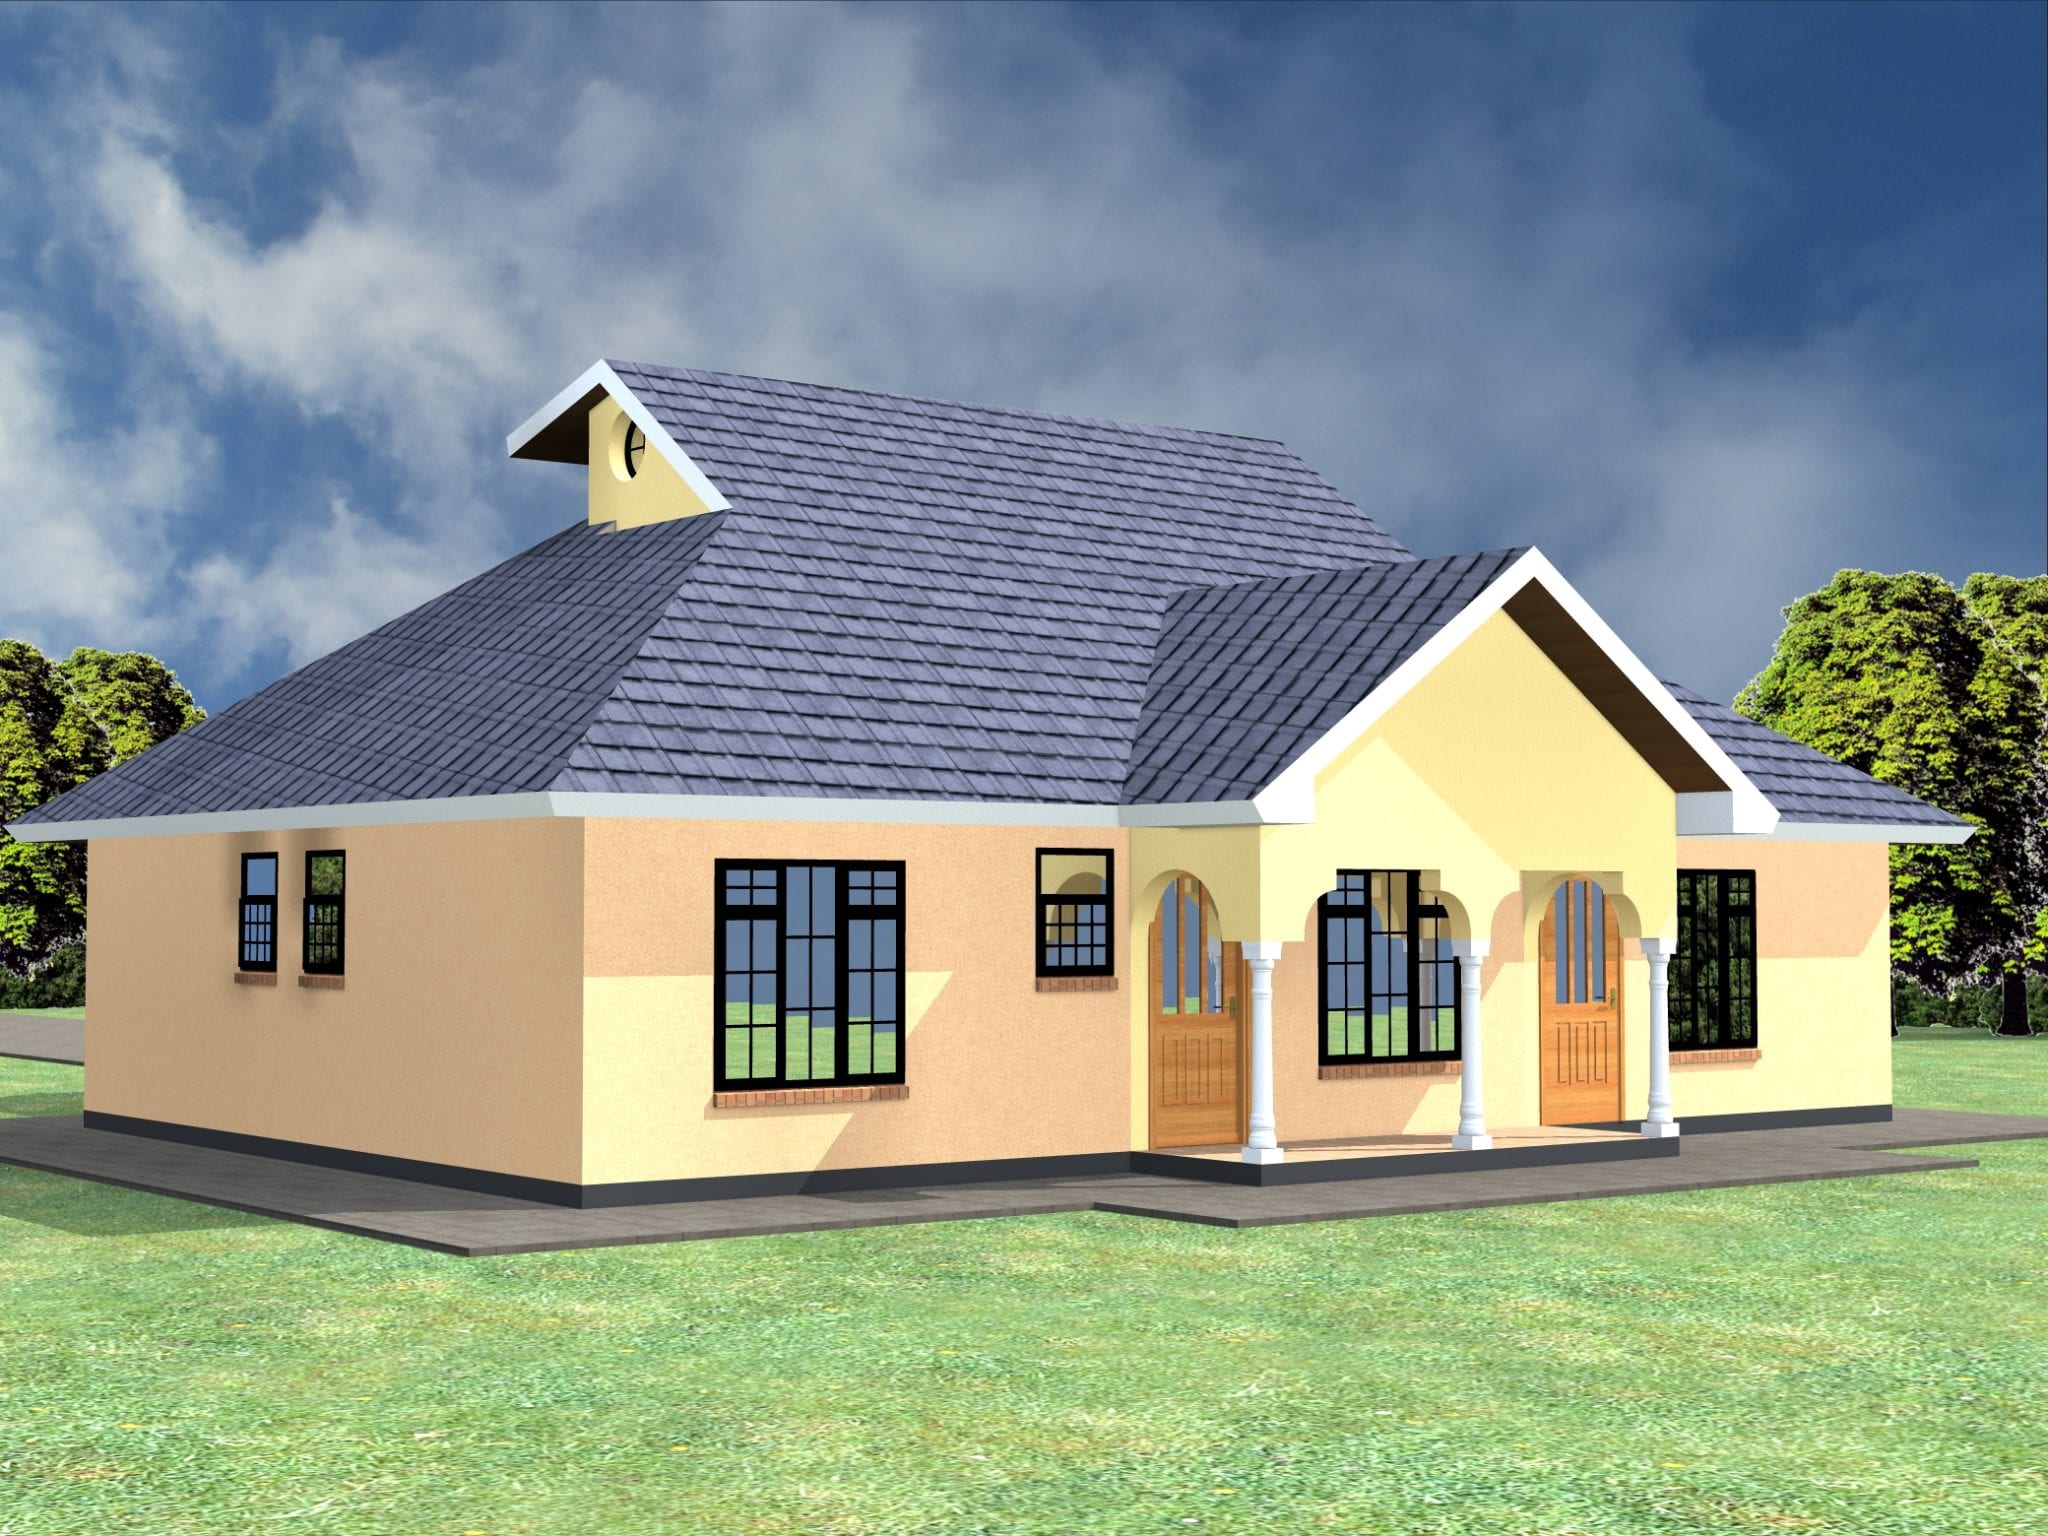  simple  3  bedroom  house  plans  without garage  HPD Consult